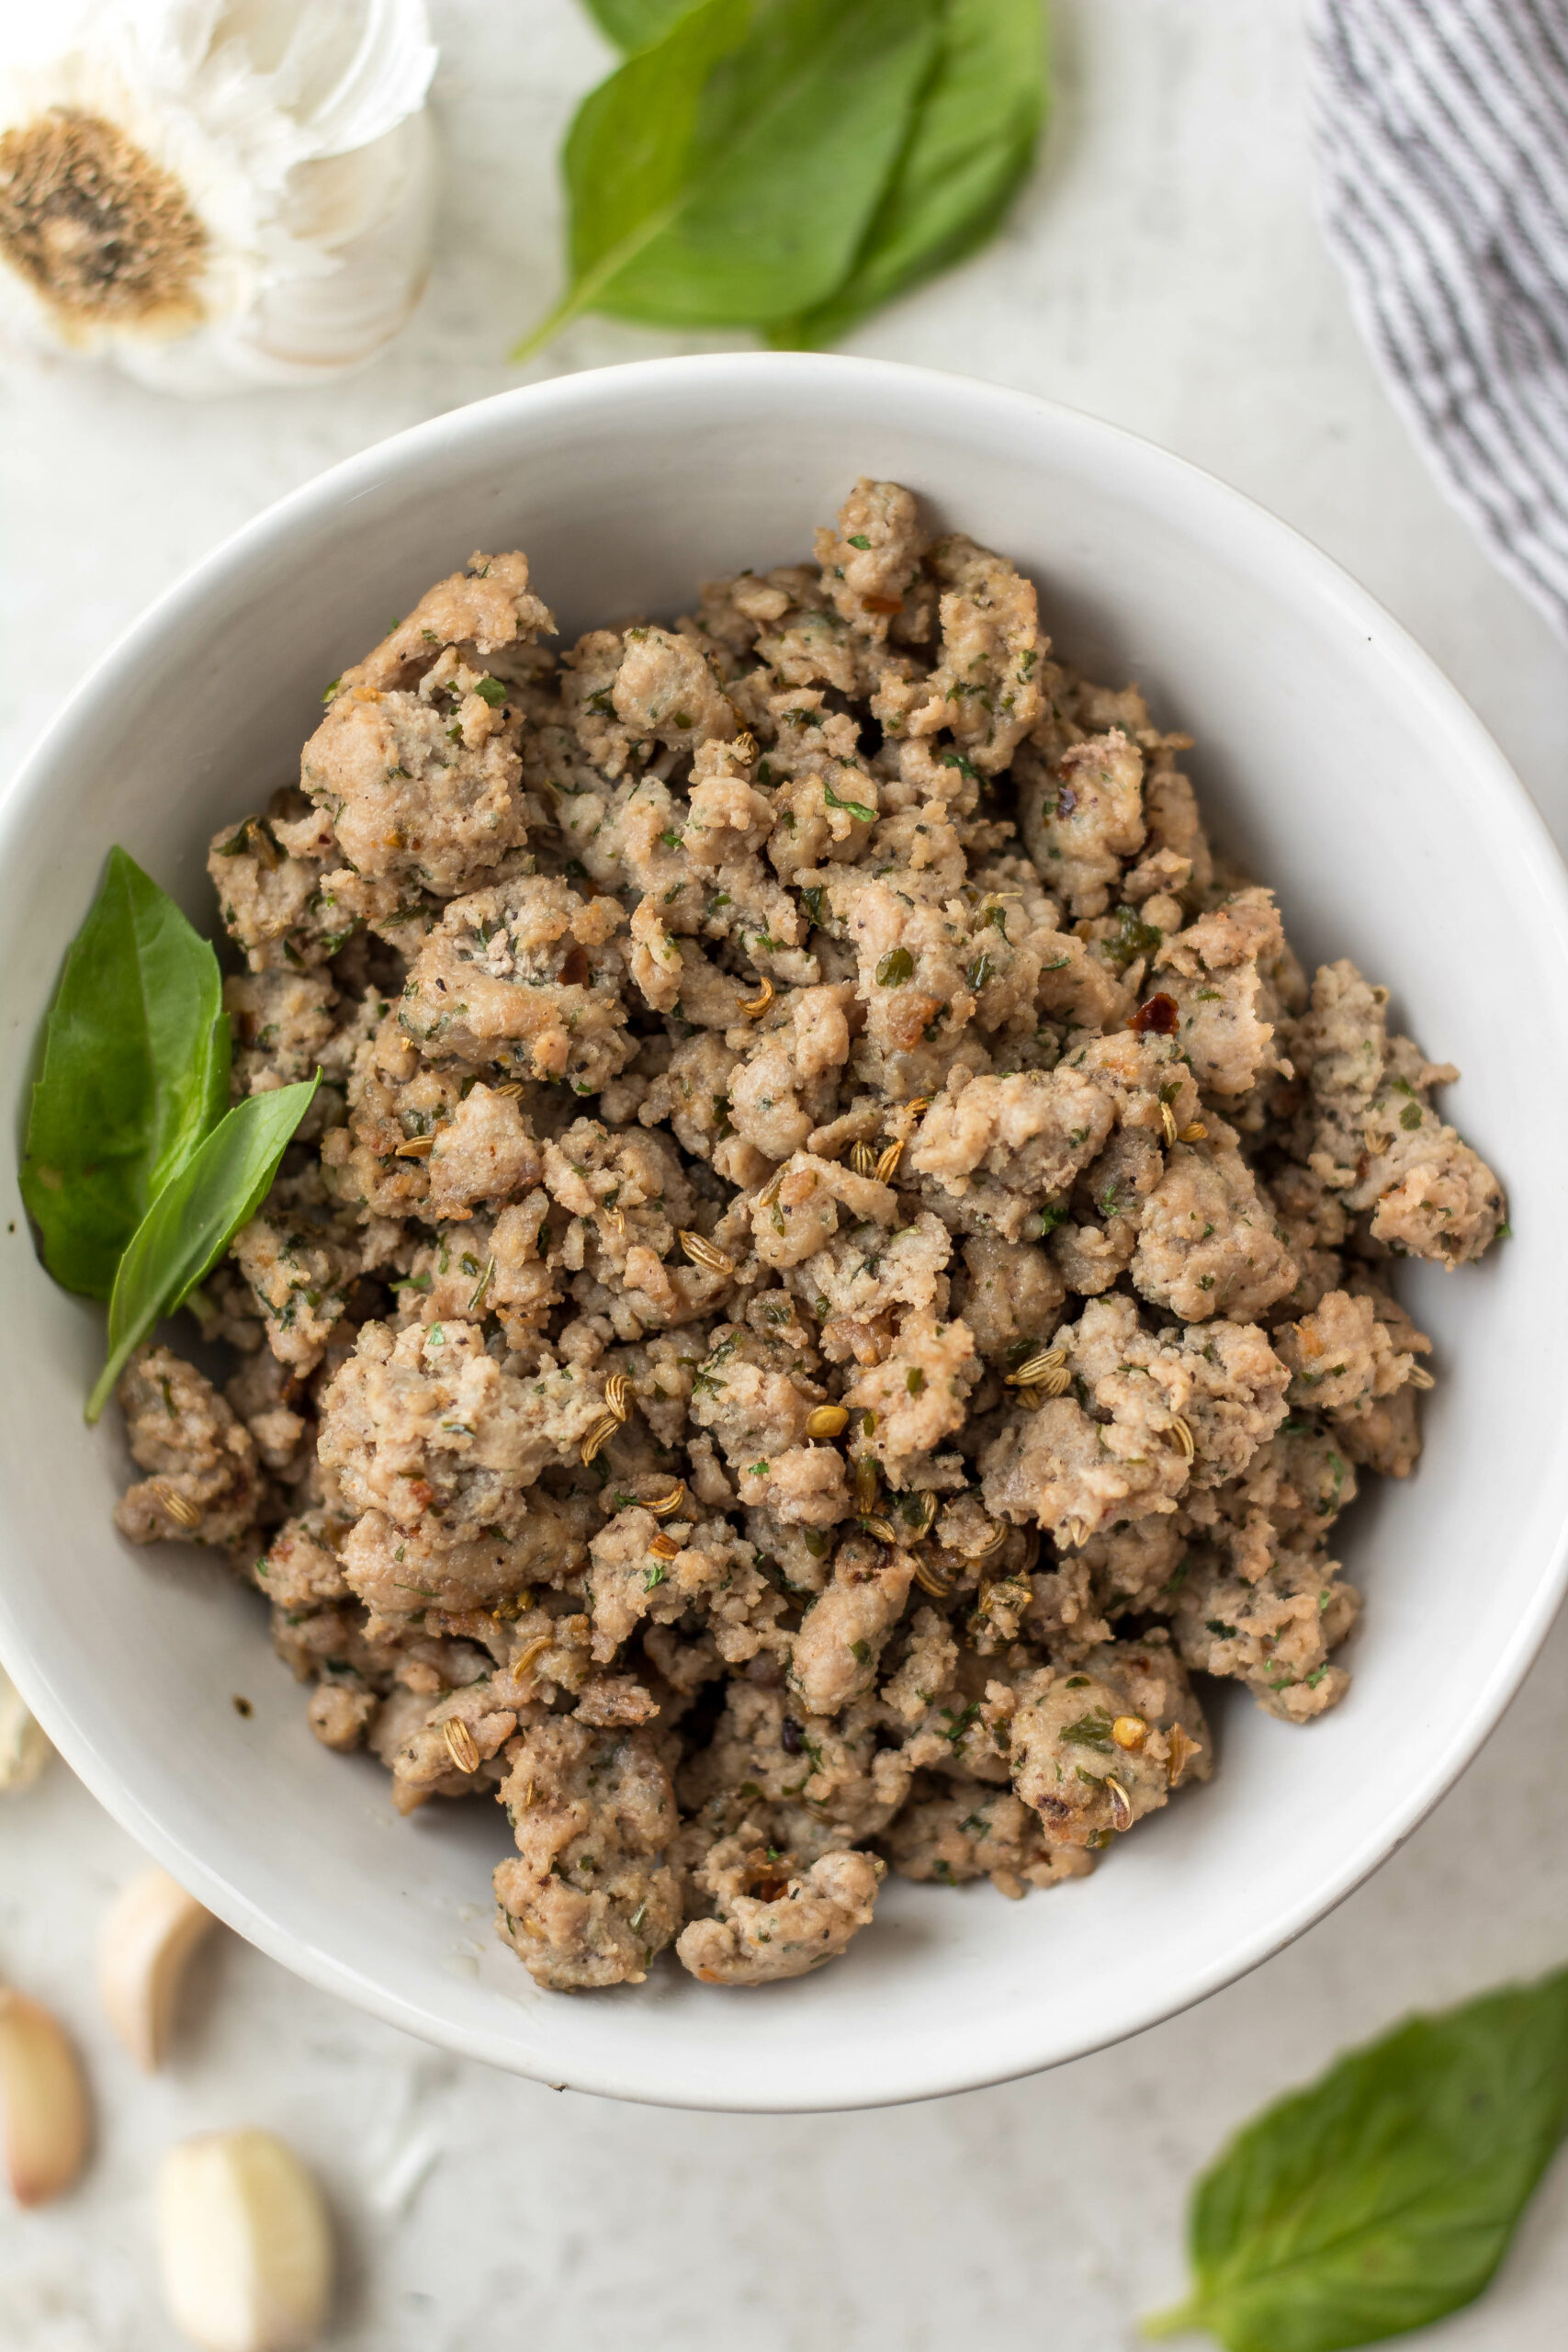 This homemade italian sausage is  Whole30 and paleo. It is gluten free and sugar free and is the best way to have a healthy Italian sausage on hand. This recipe uses a few staple ingredients you likely already have on hand and is fast and easy to make. Plus it can be frozen for later or used right away! Stop looking for paleo italian sausage at the store and make your own! #Whole30recipes #healthyporkrecipes #glutenfreepork